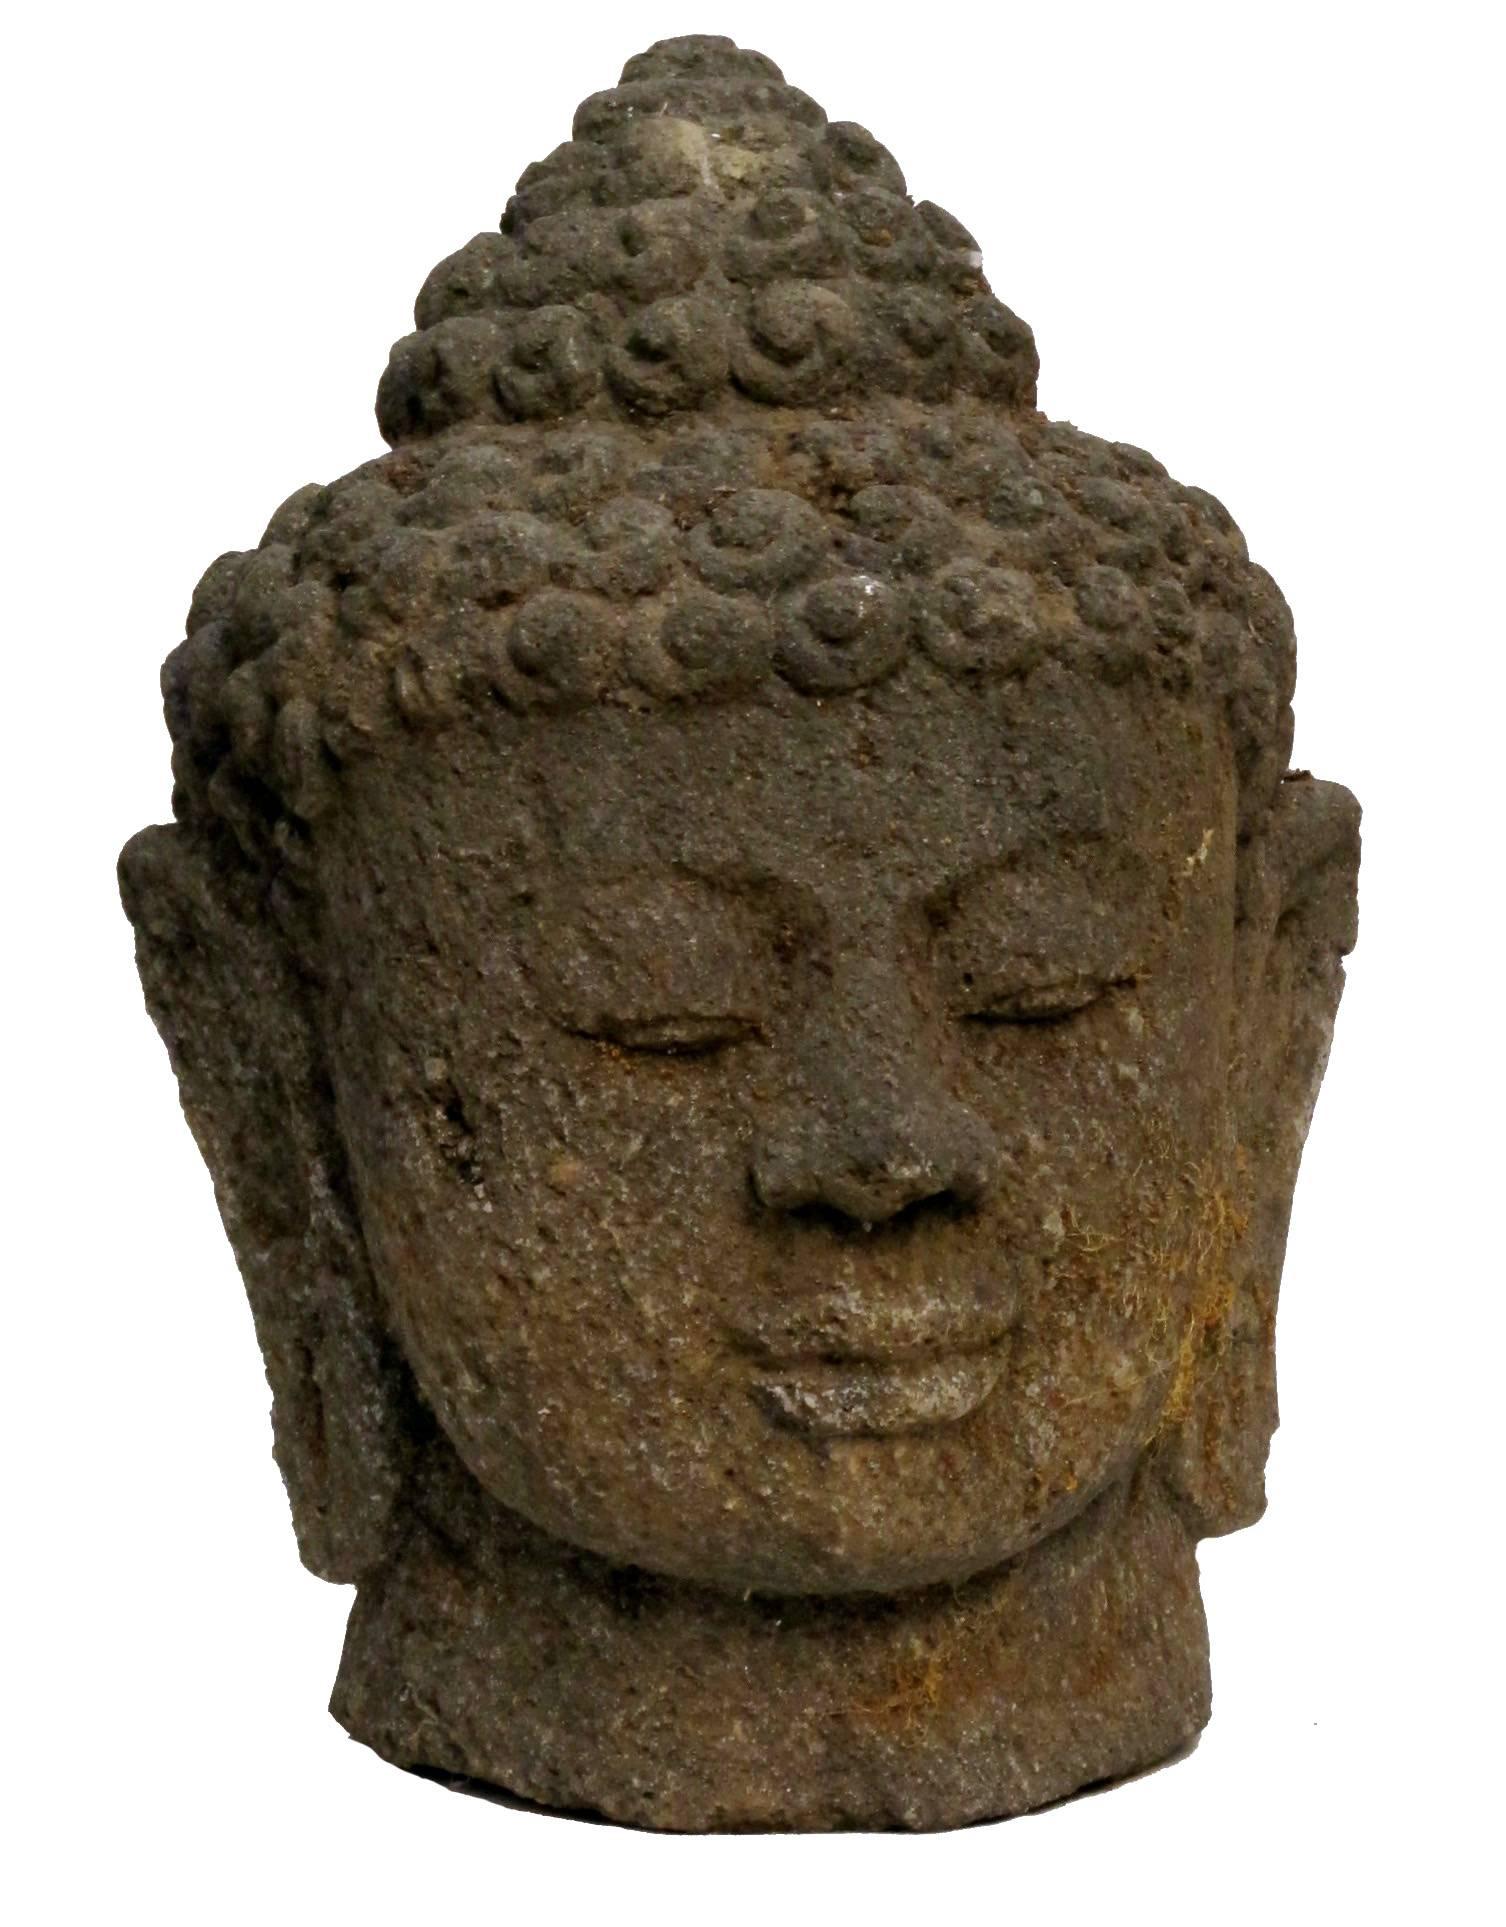 A large volcanic stone Buddha sculpture. This Buddha has sat in a garden for over 30 years and shows beautiful weathered age and moss growth. Chinese, mid 20th century.